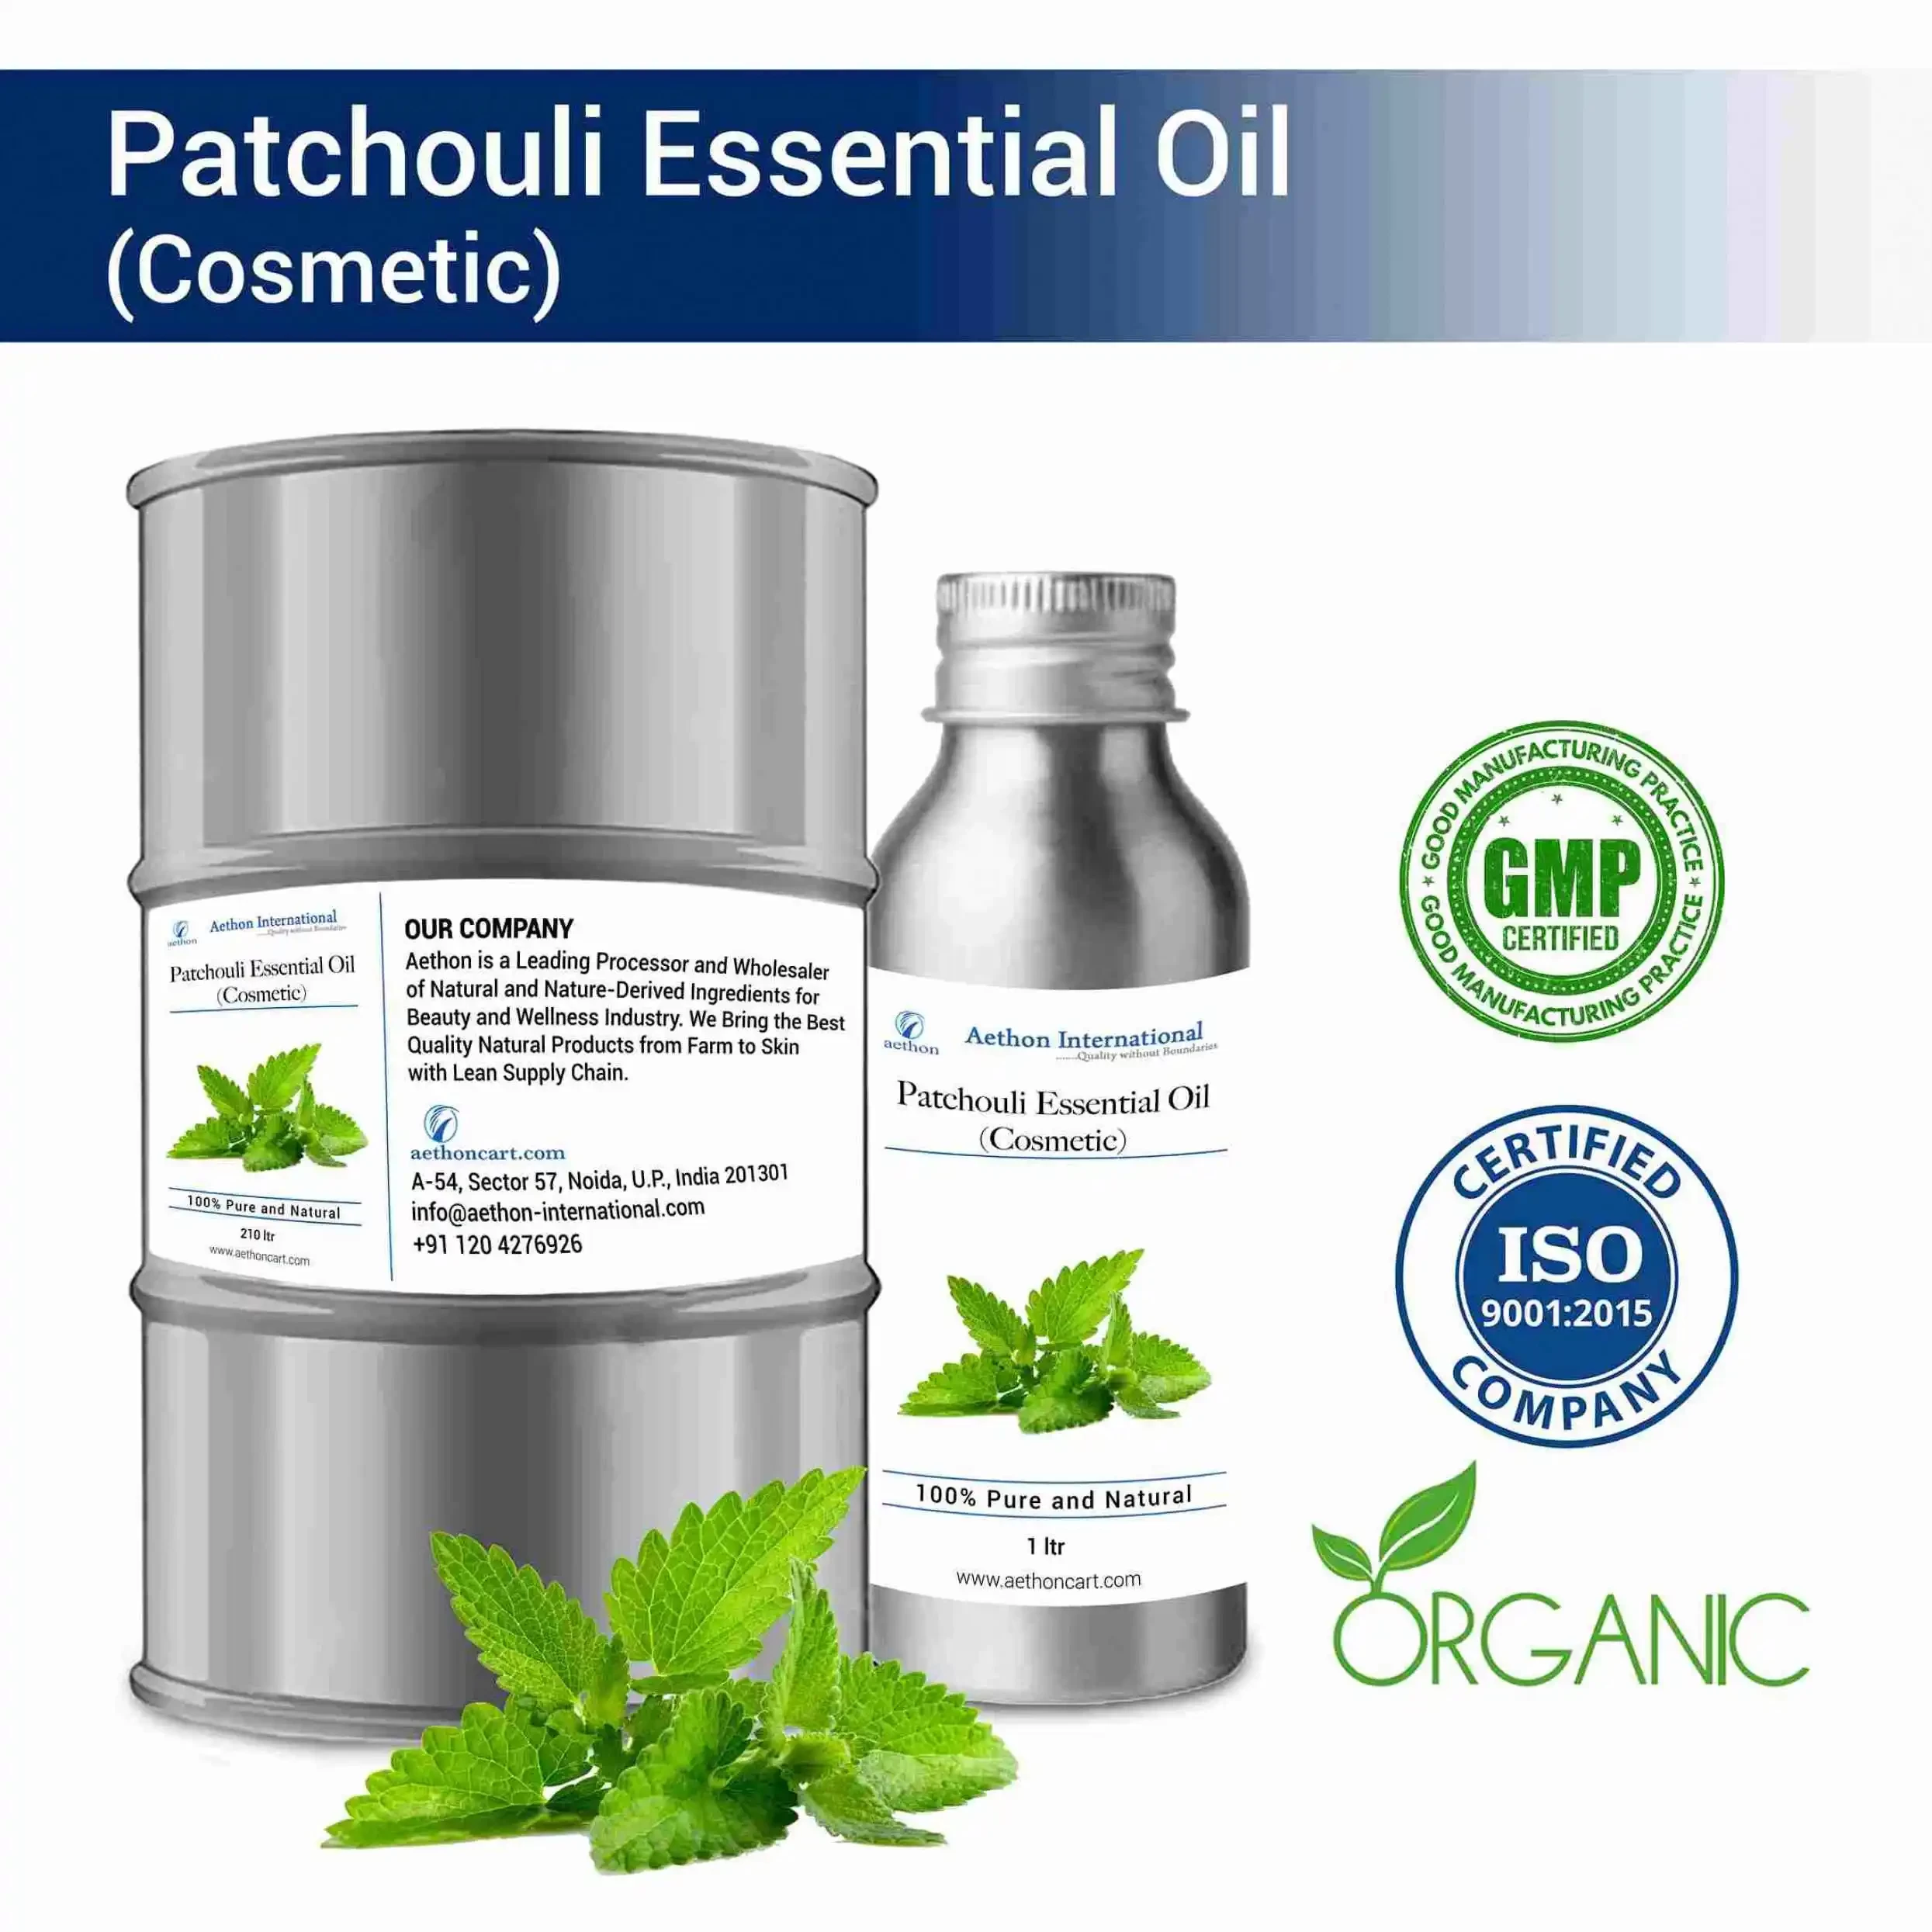 Patchouli Essential Oil (Cosmetic)